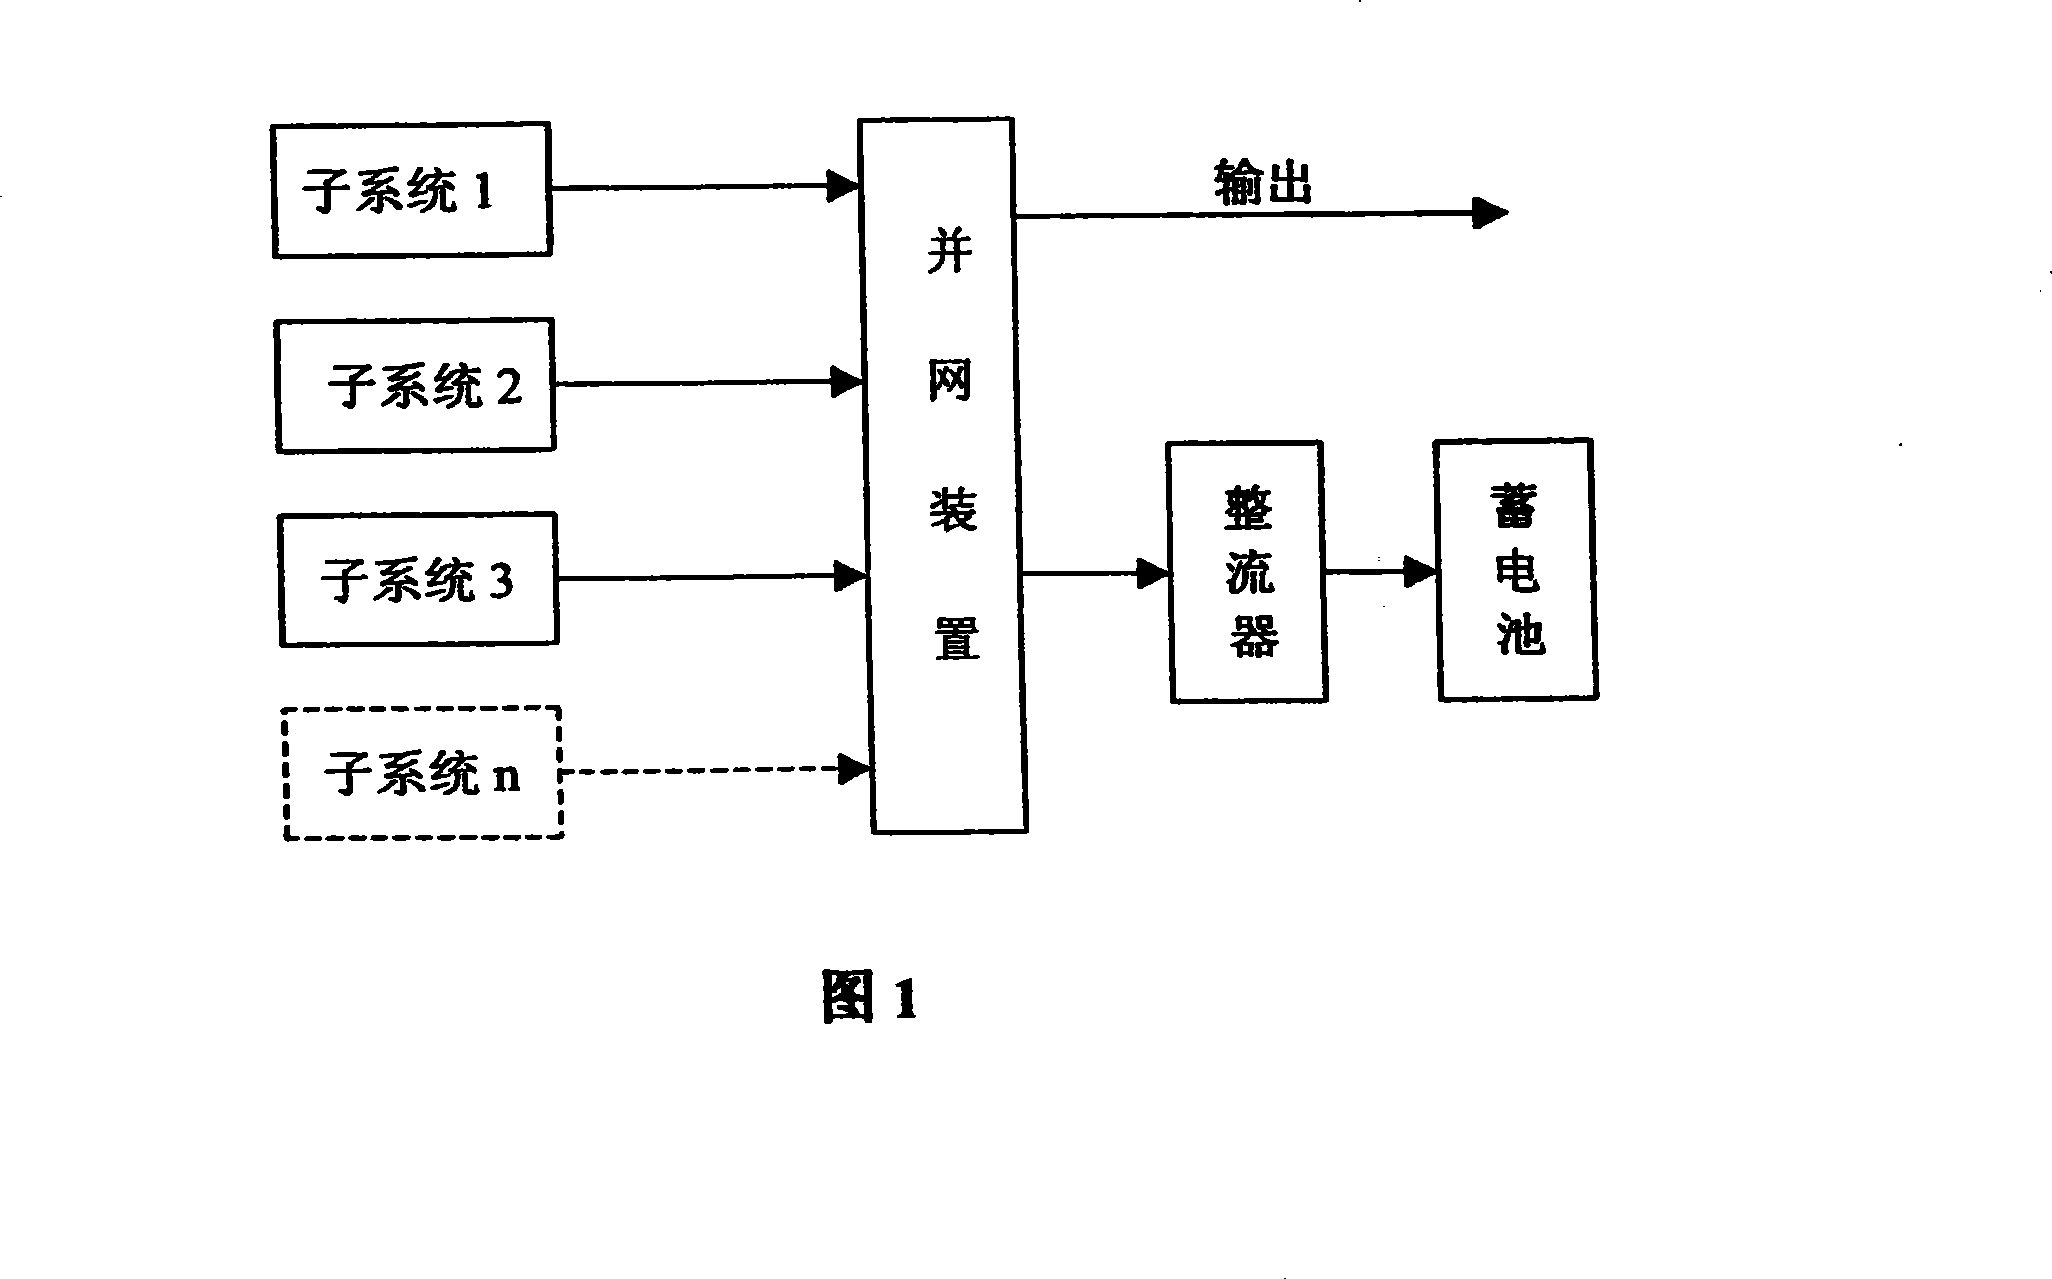 Method and device for power generation by employing multiple dispersed residual heat sources and various residual heat carrier medium